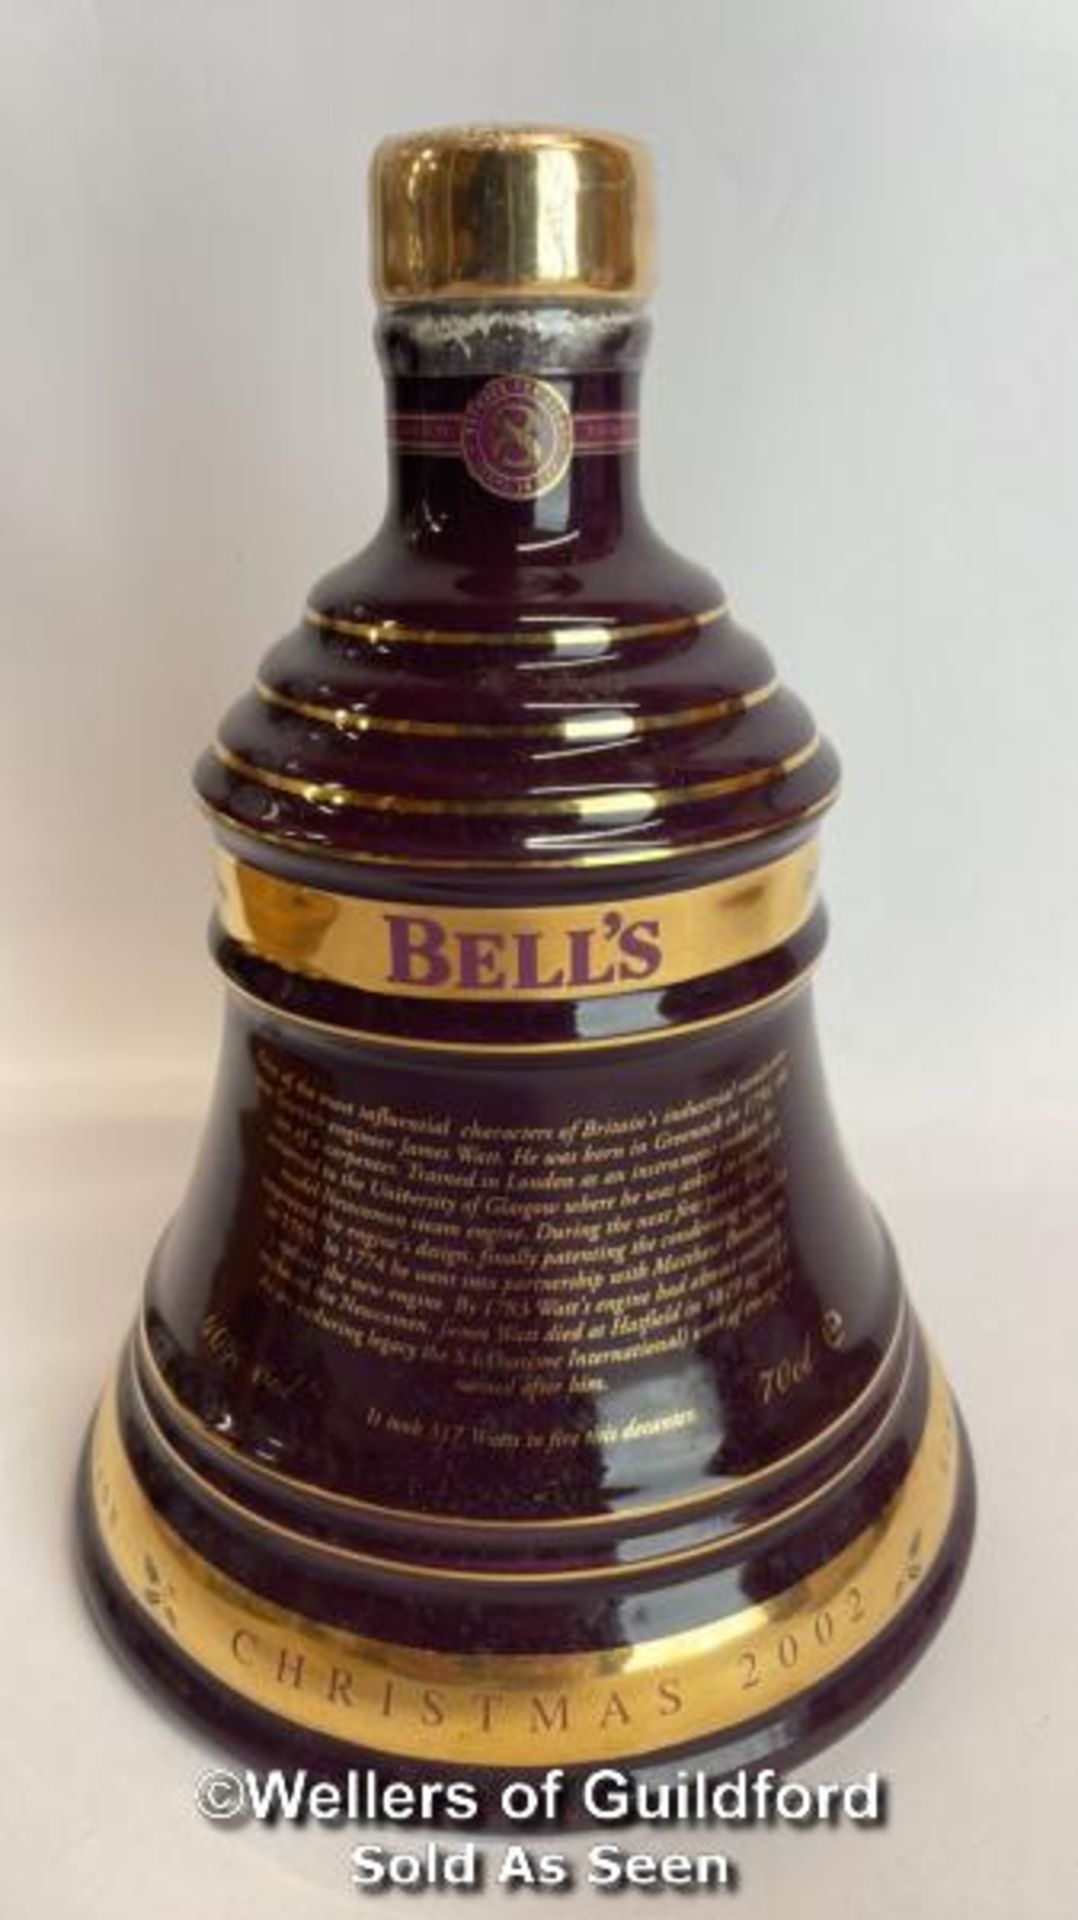 Bell's 2002 Old Scotch Whisky Limited Edition Christmas Decanter, Aged 8 Years, Brand New and Boxed, - Image 6 of 8